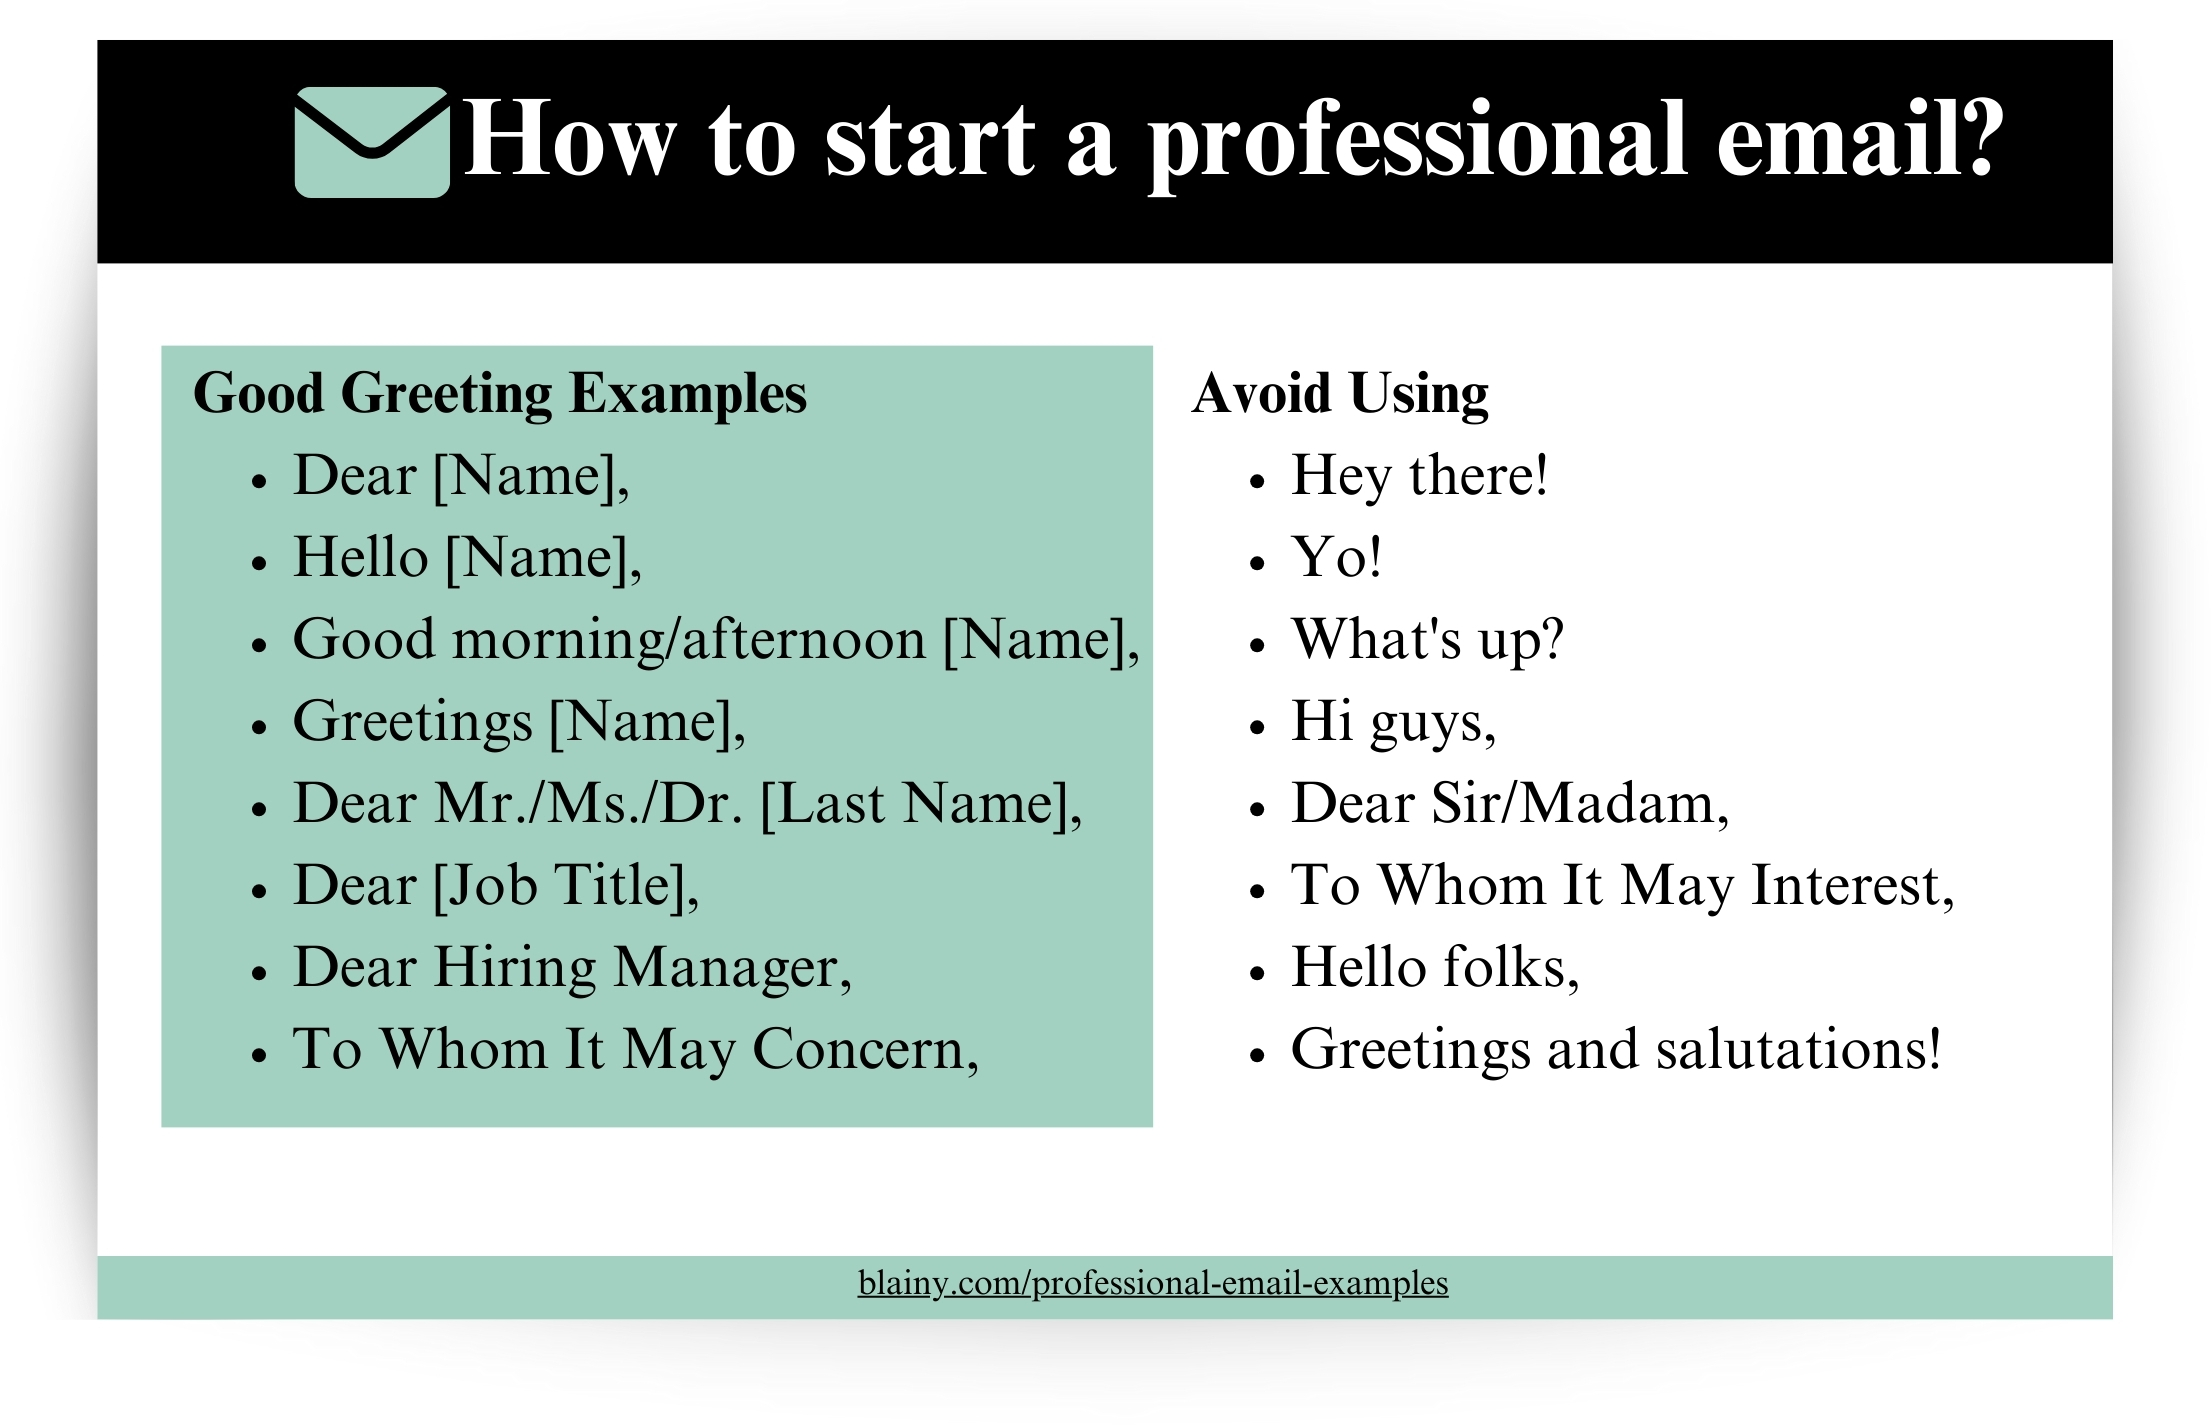 How to start a professional emails